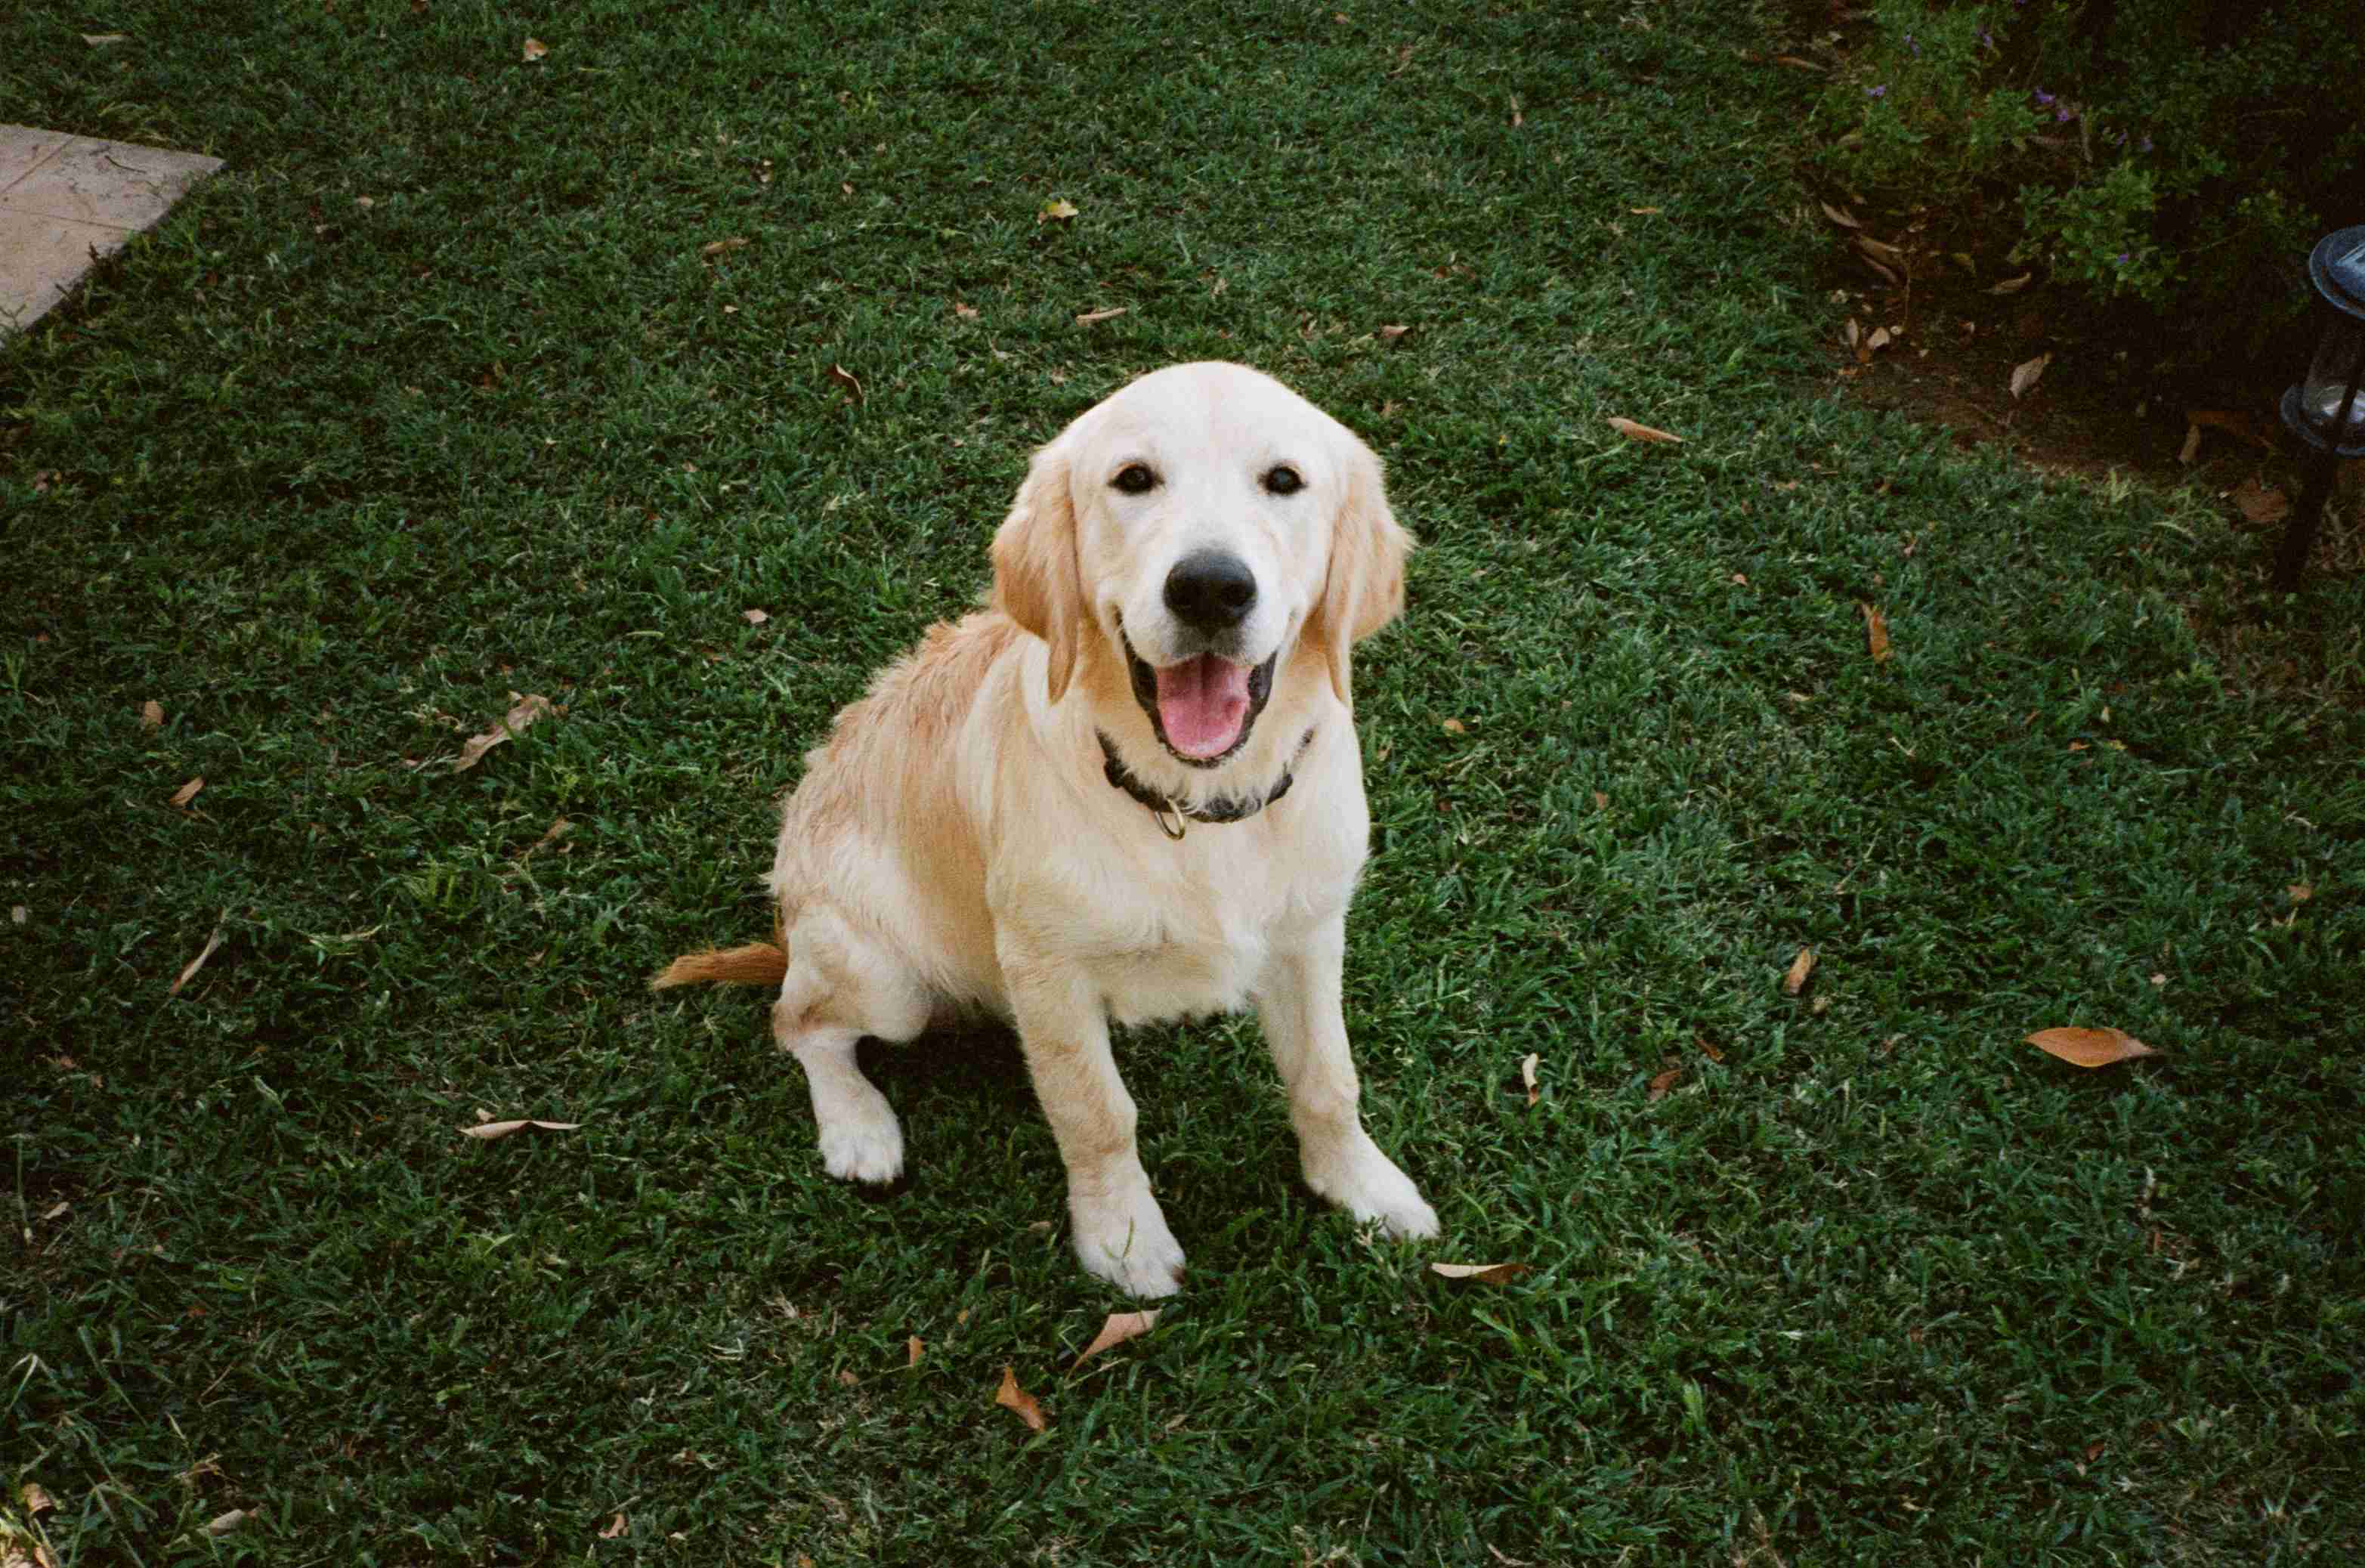 Can Golden Retrievers be prone to certain types of cancer?